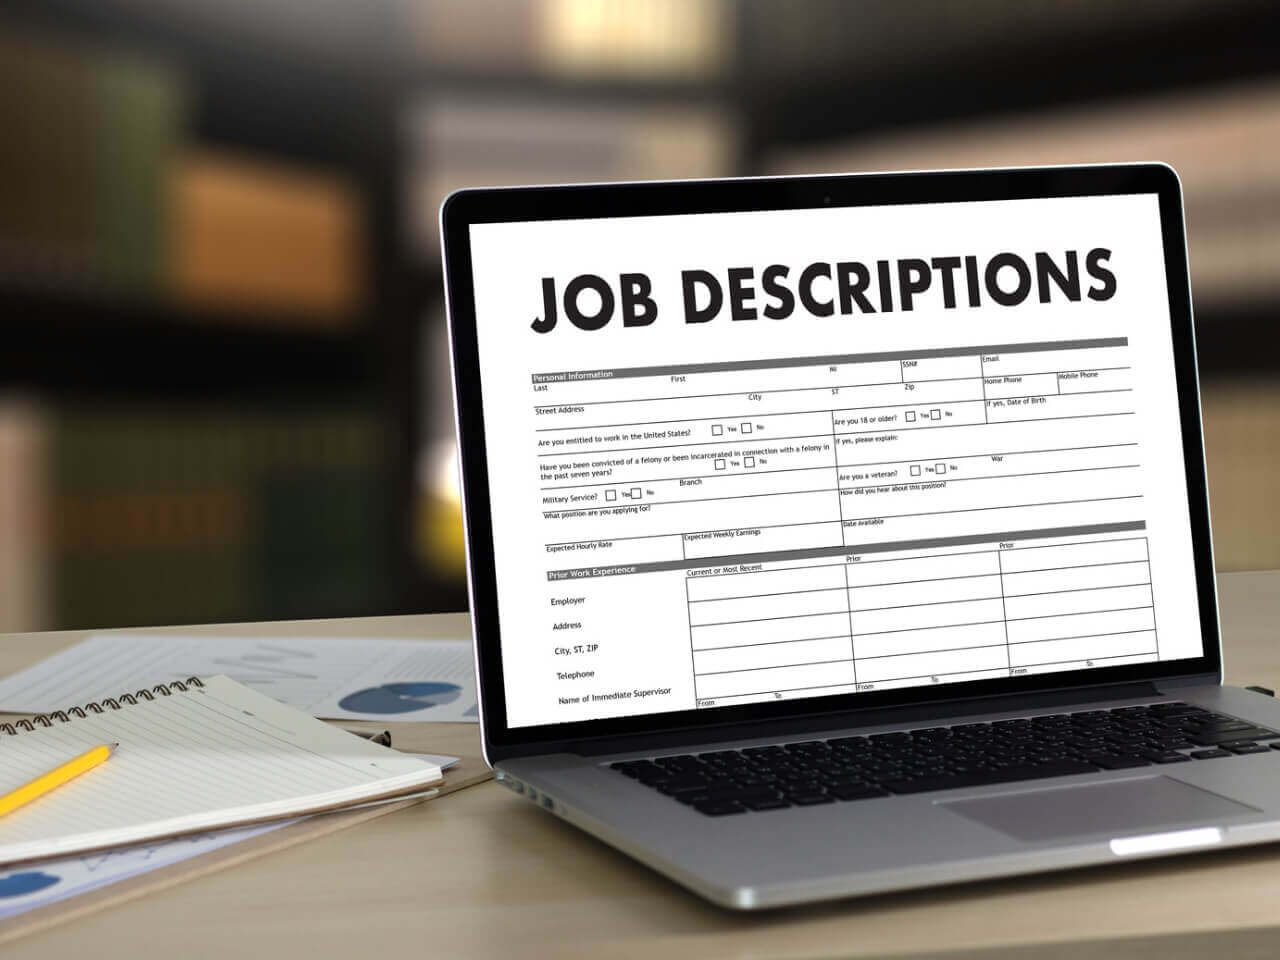 Permalink to: 5 Tips to create the best Job Description